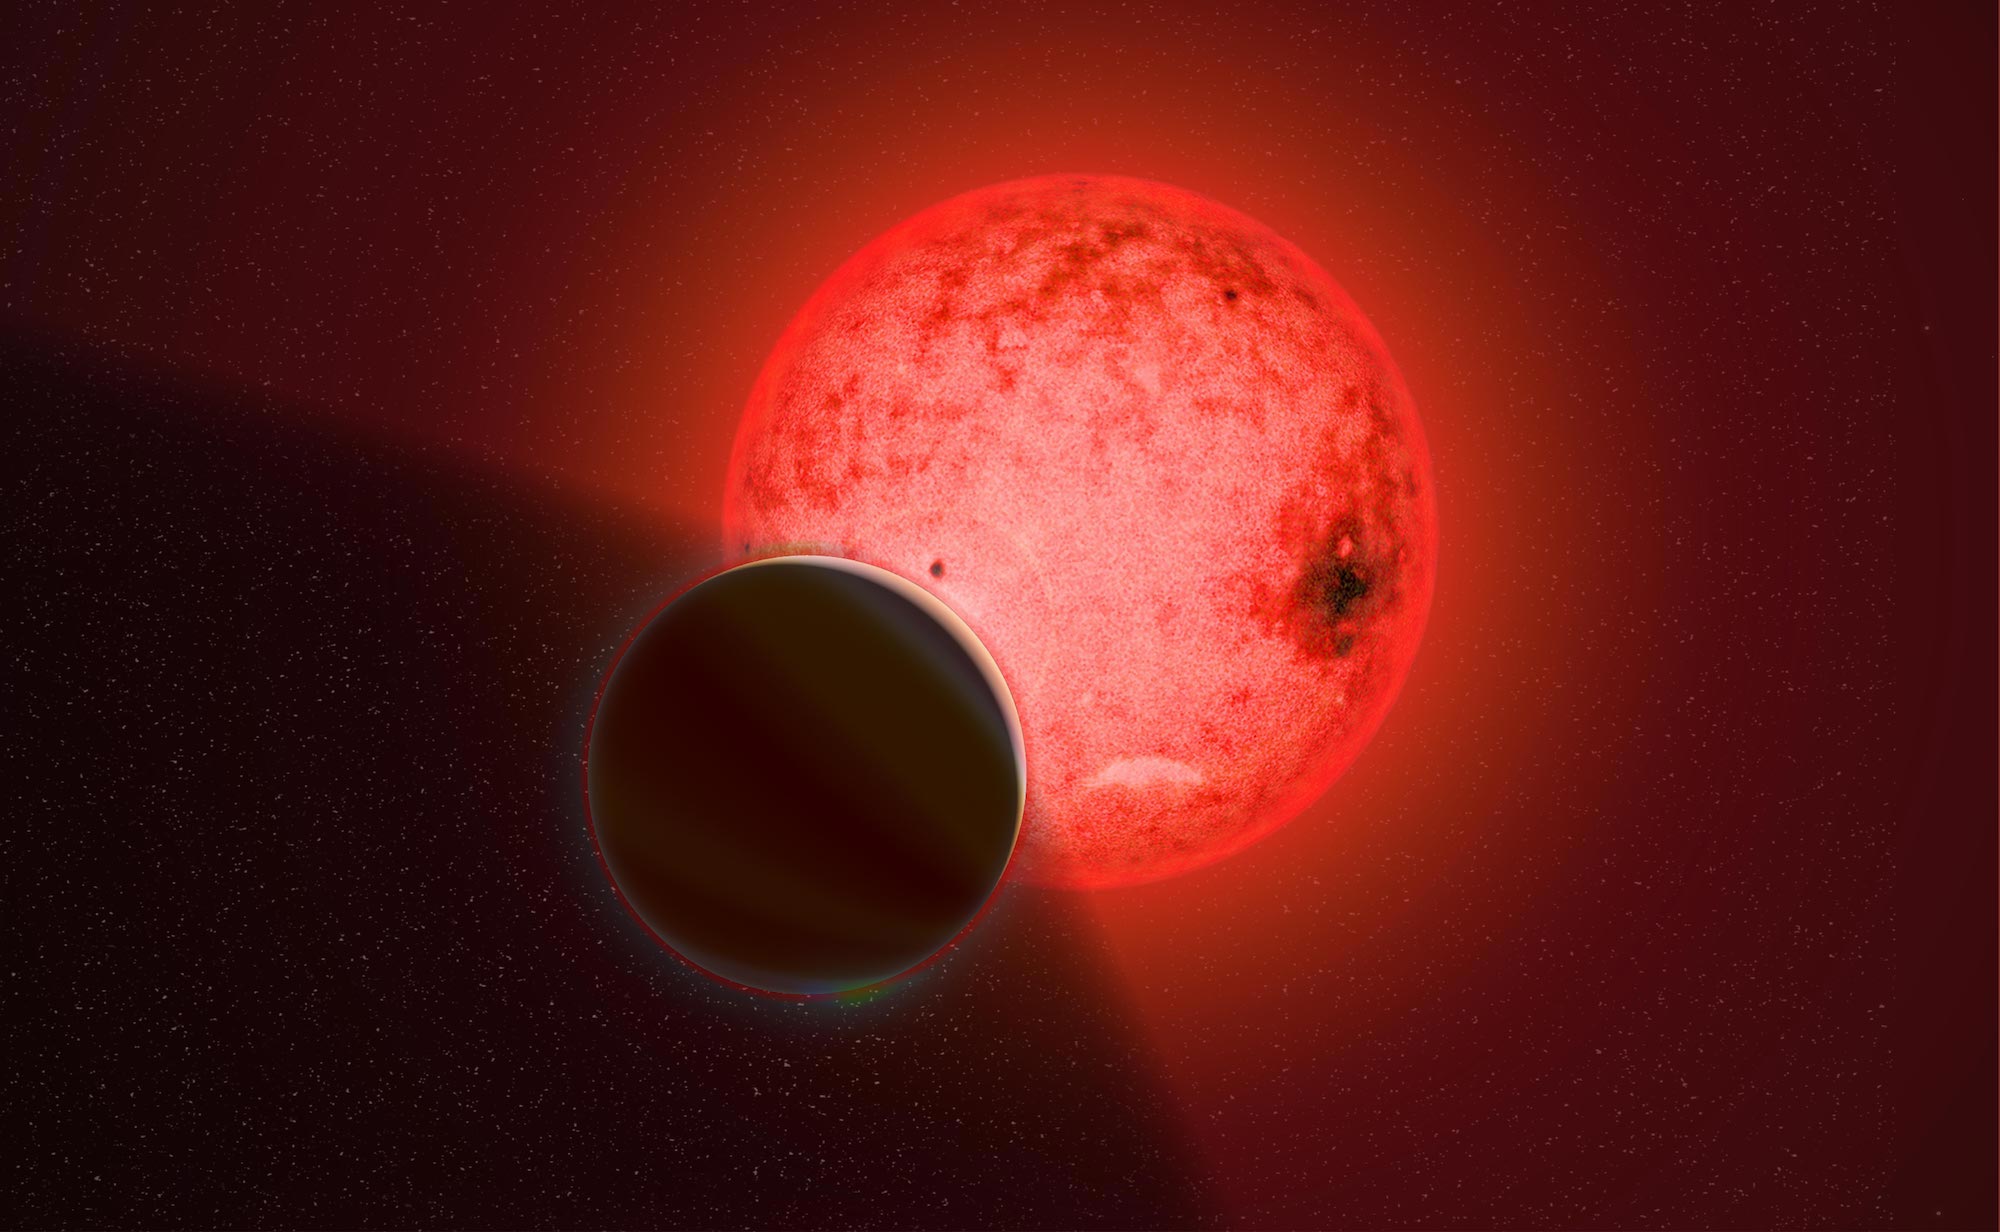 Large Gas Giant Planet Orbiting Small Red Dwarf Star